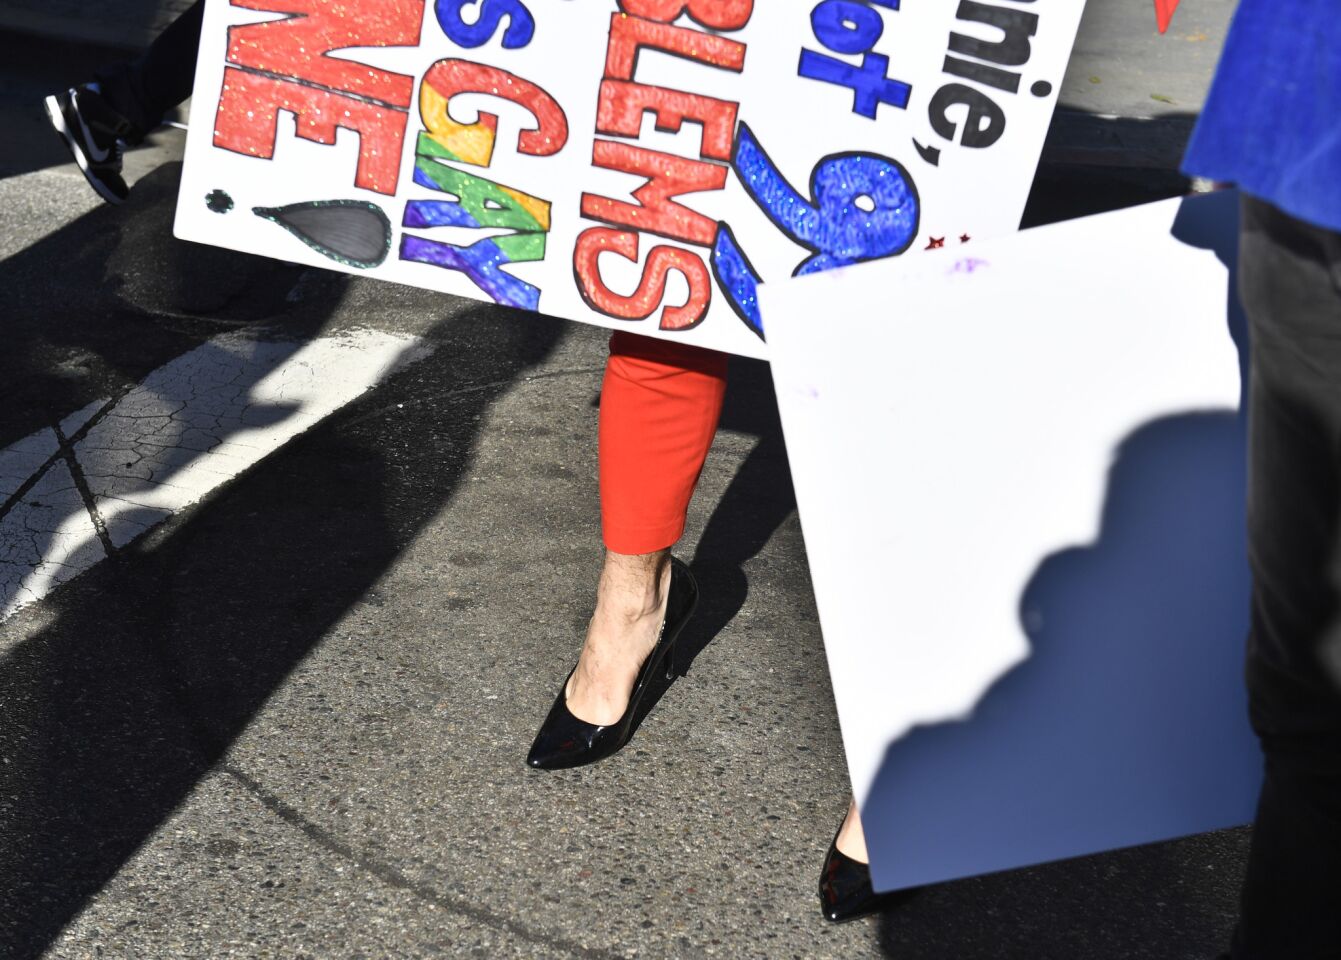 An orange suit and high heels worn by Ryan Tymensky peek out from under a handmade sign before the start of the women's march.